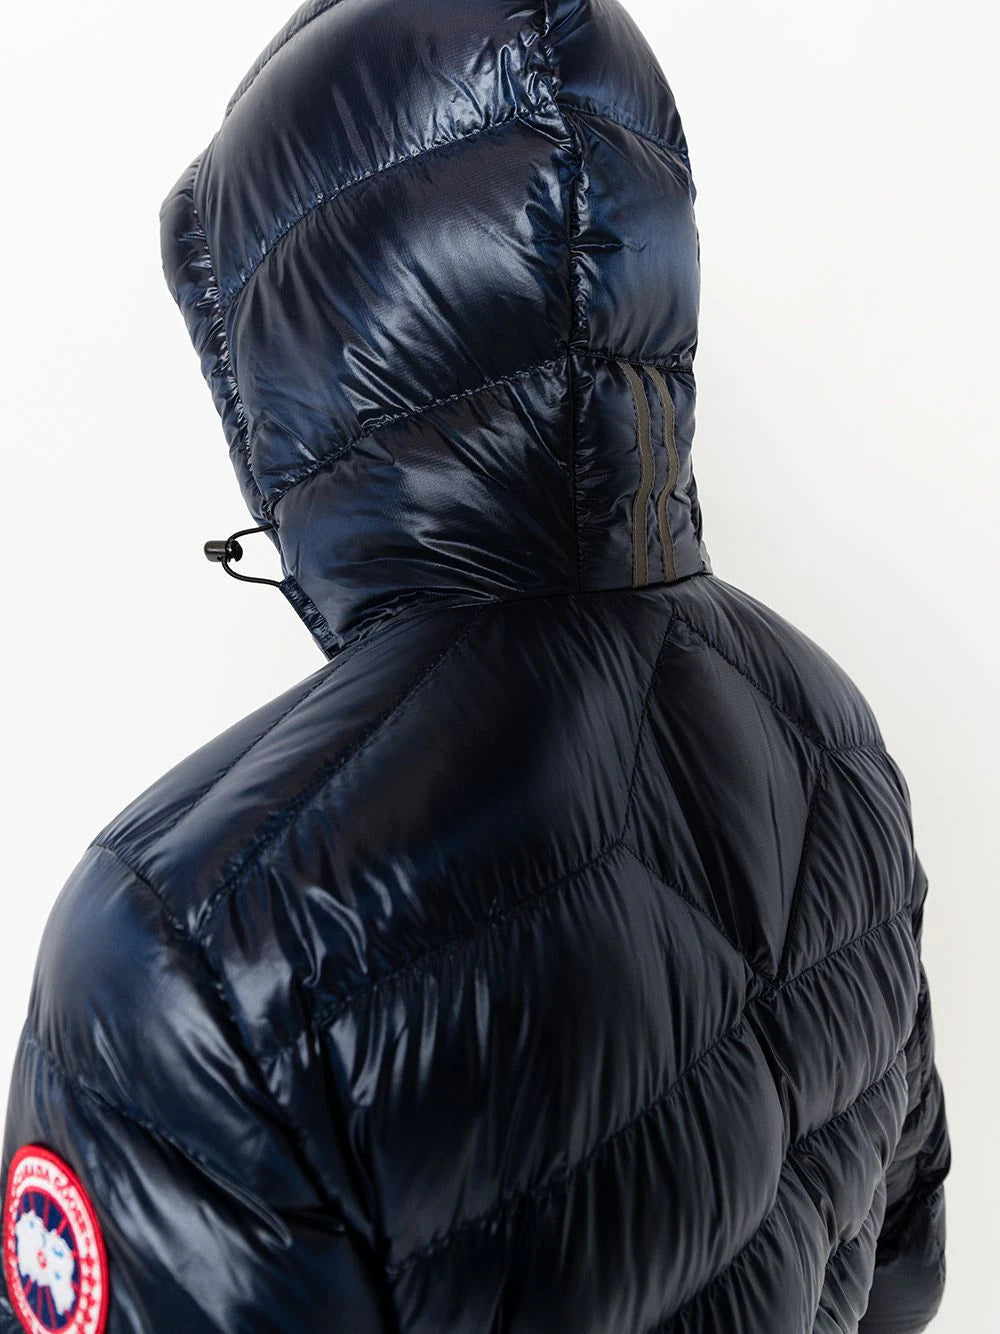 Canada Goose Crofton Padded Down Hooded Jacket in Navy